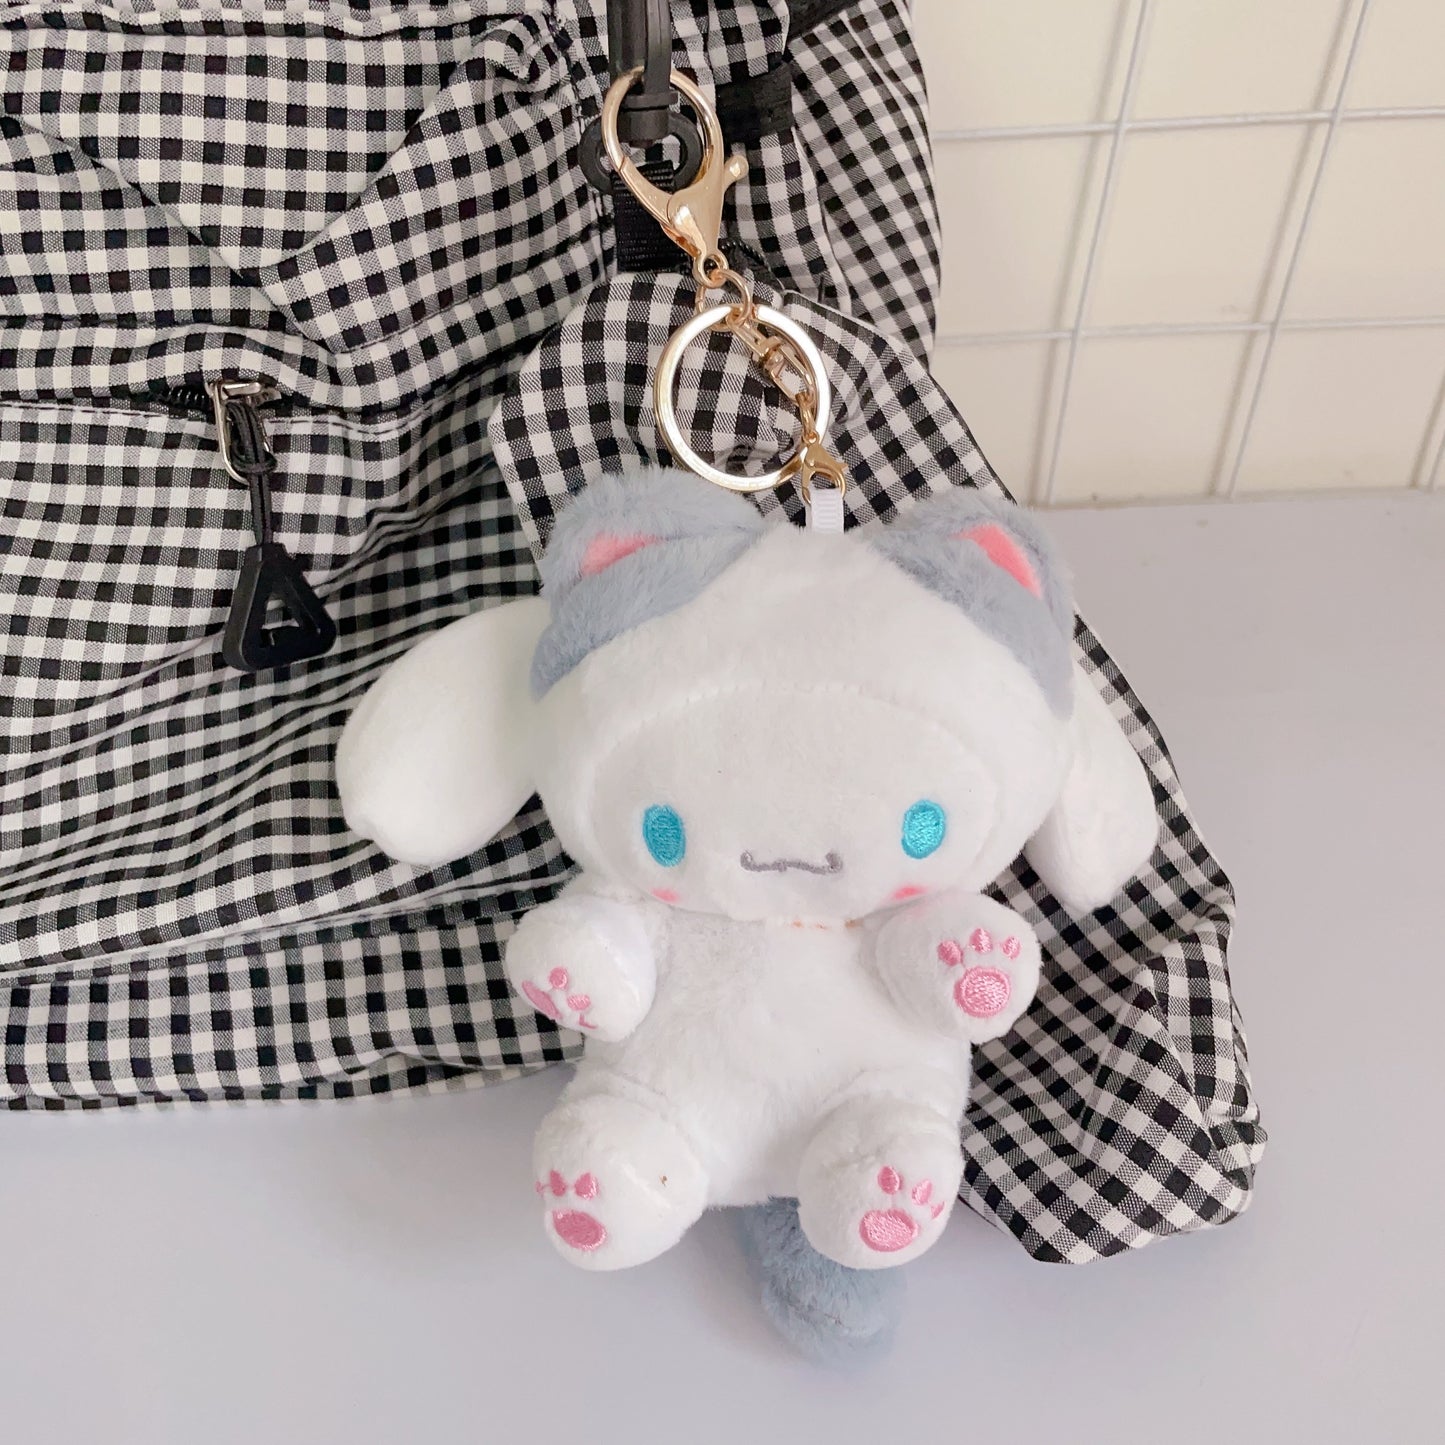 Ghingham Cinnamoroll Backpack with pouch